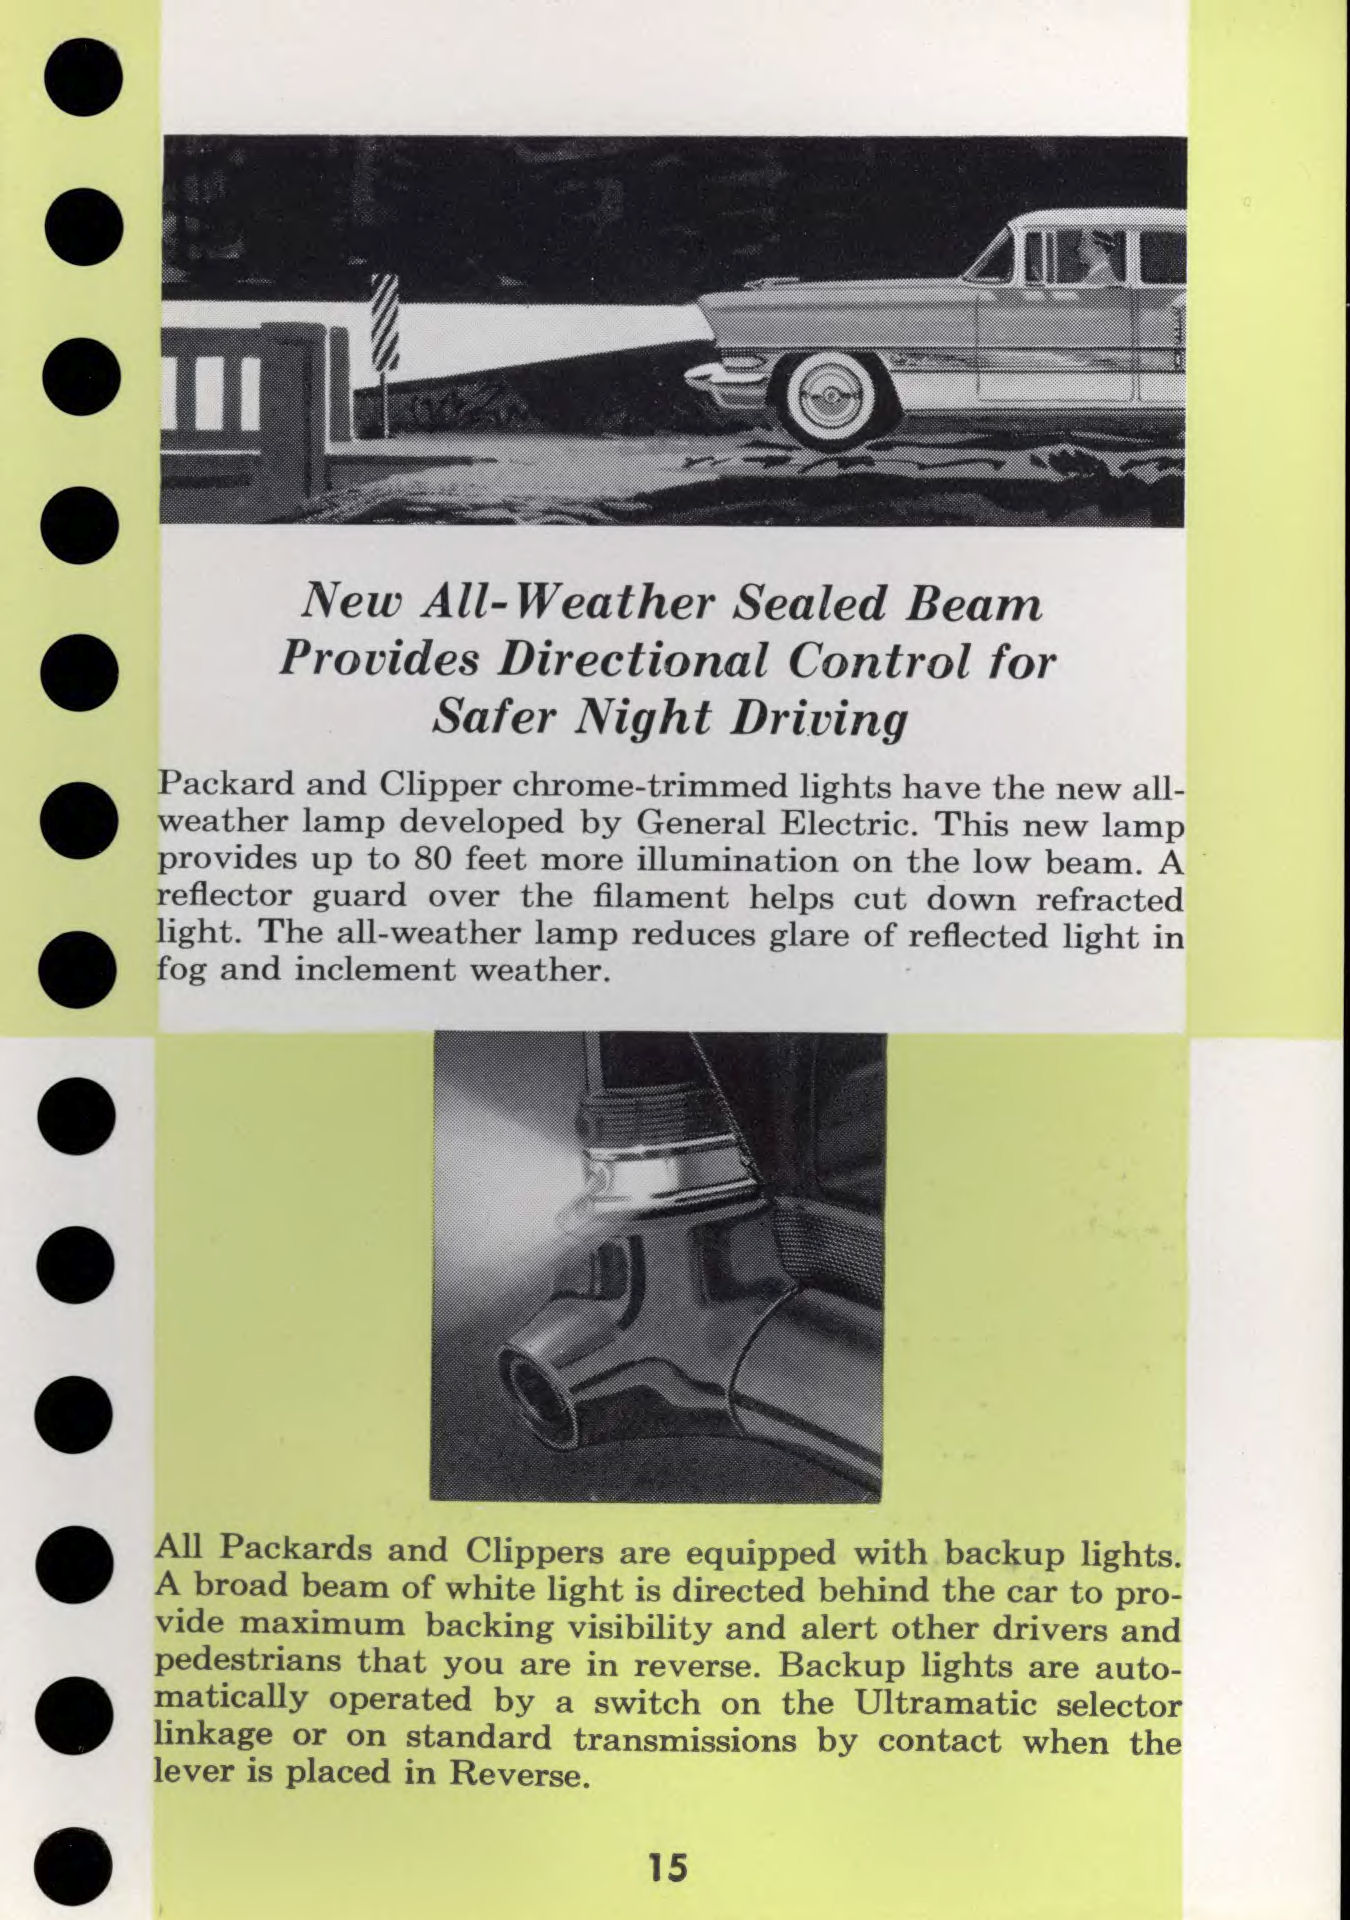 1956 Packard Data Book Page 7